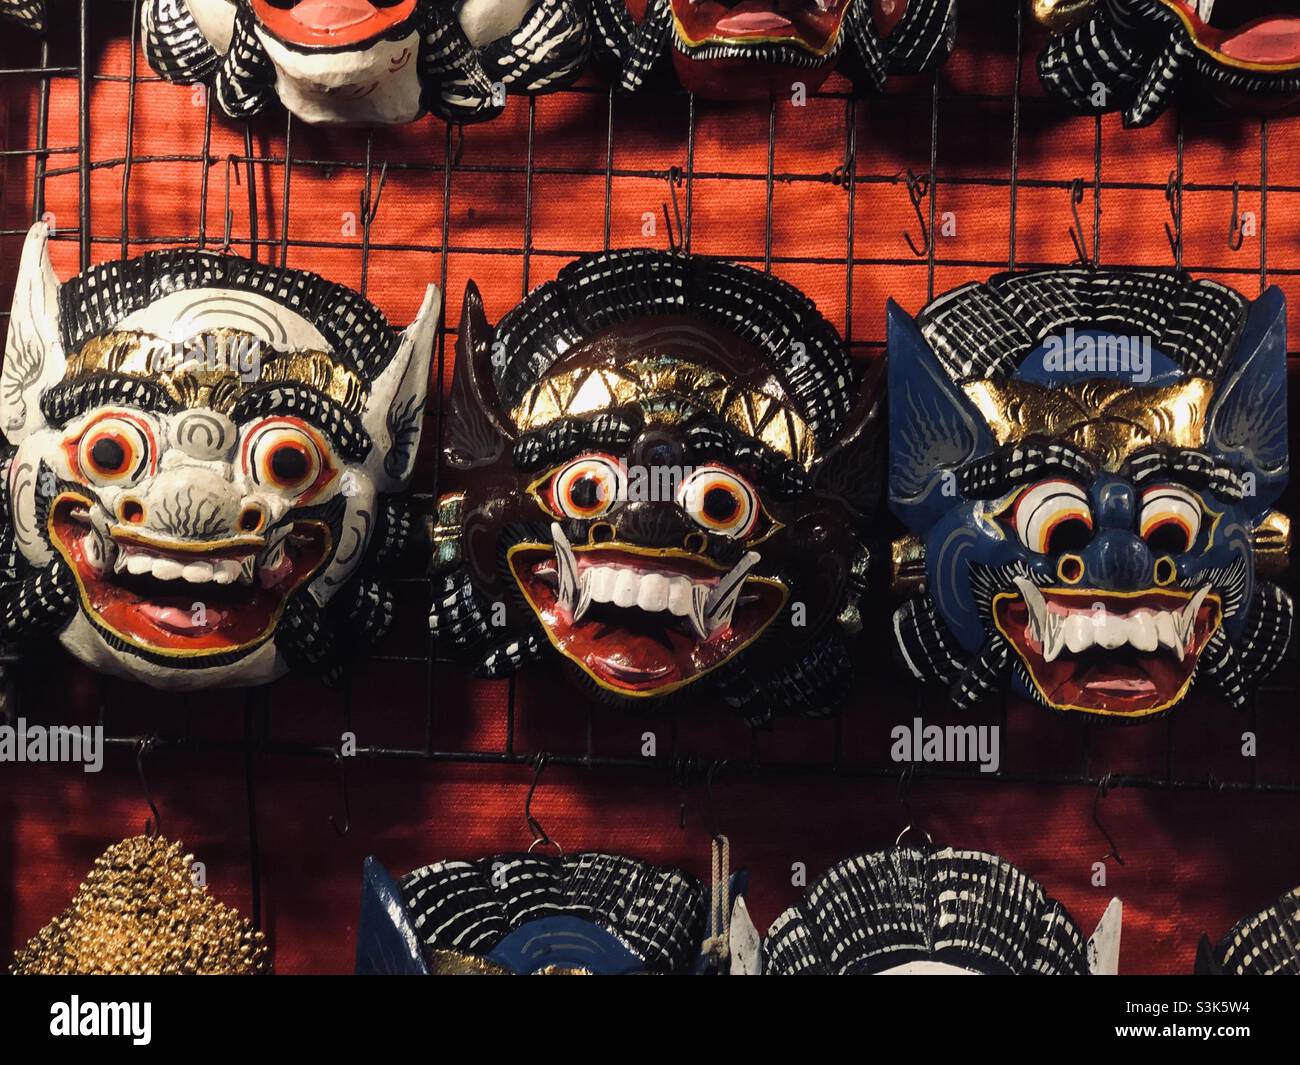 Halloween mask in Thailand made from wood by hand. Stock Photo